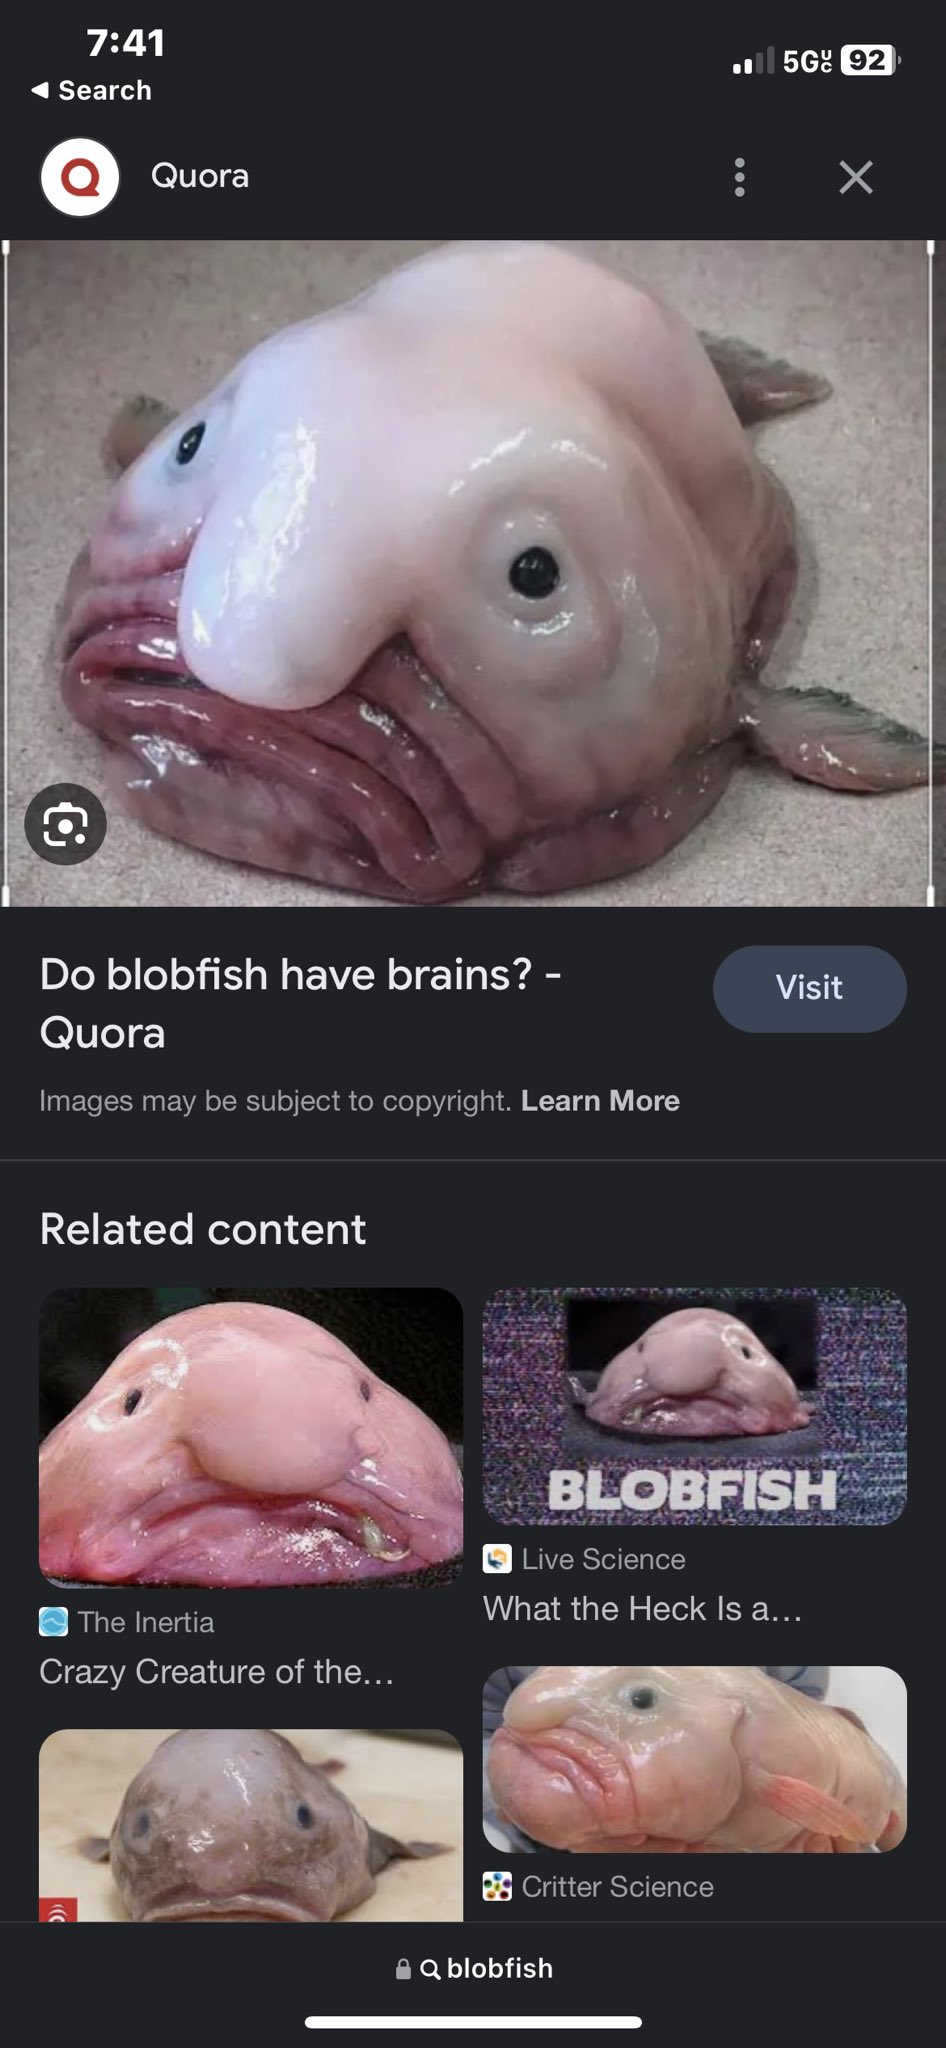 What is a blobfish? Are blobfish actually the ugliest species? - Quora